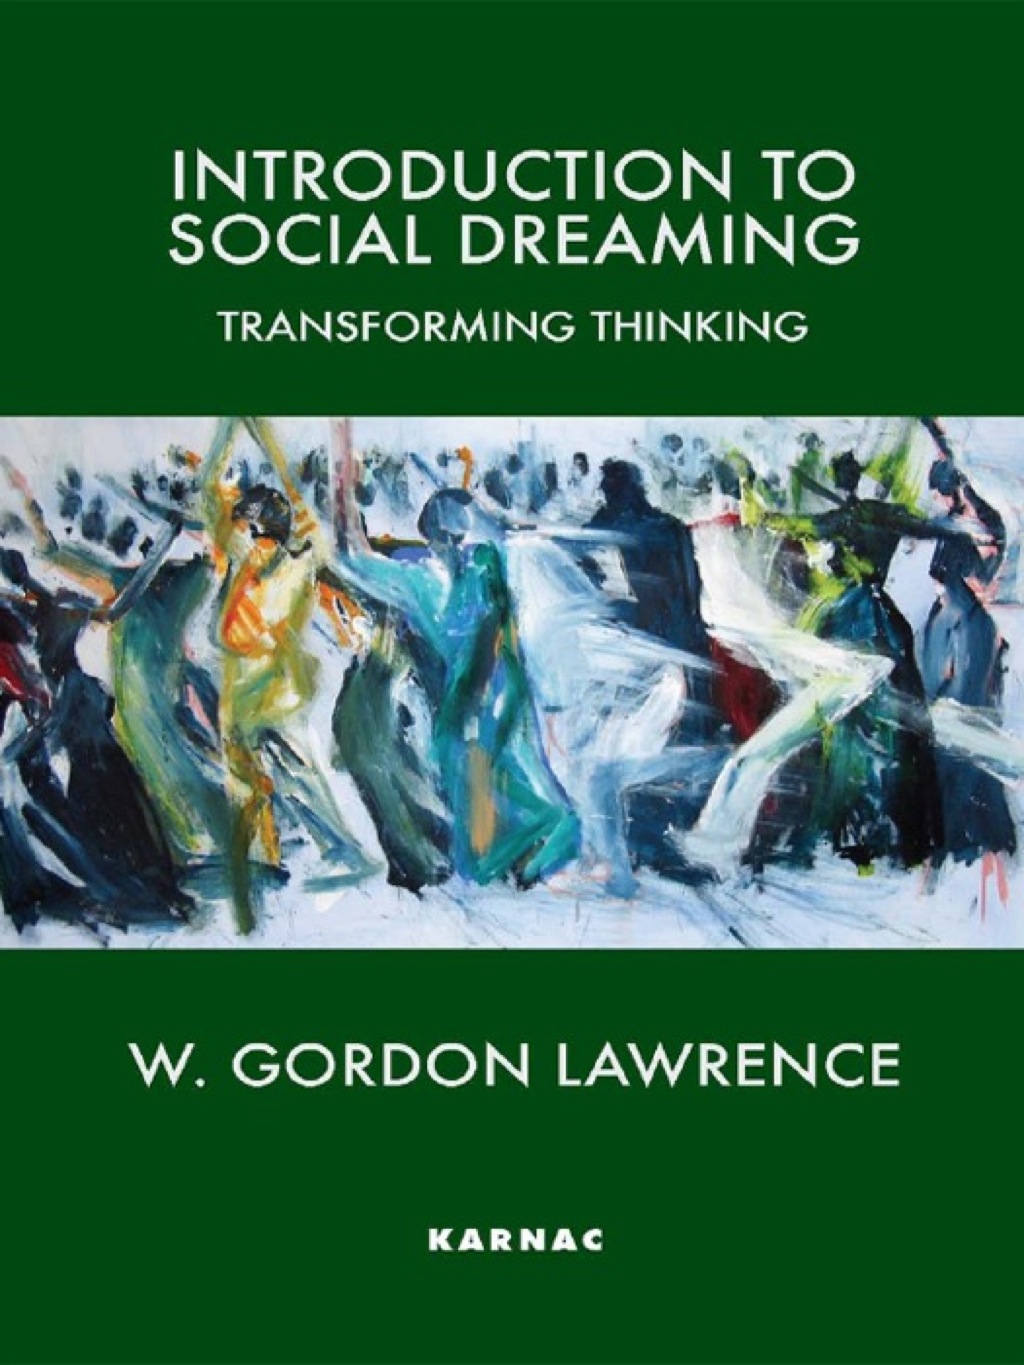 Introduction to Social Dreaming (eBook) - W. Gordon Lawrence,